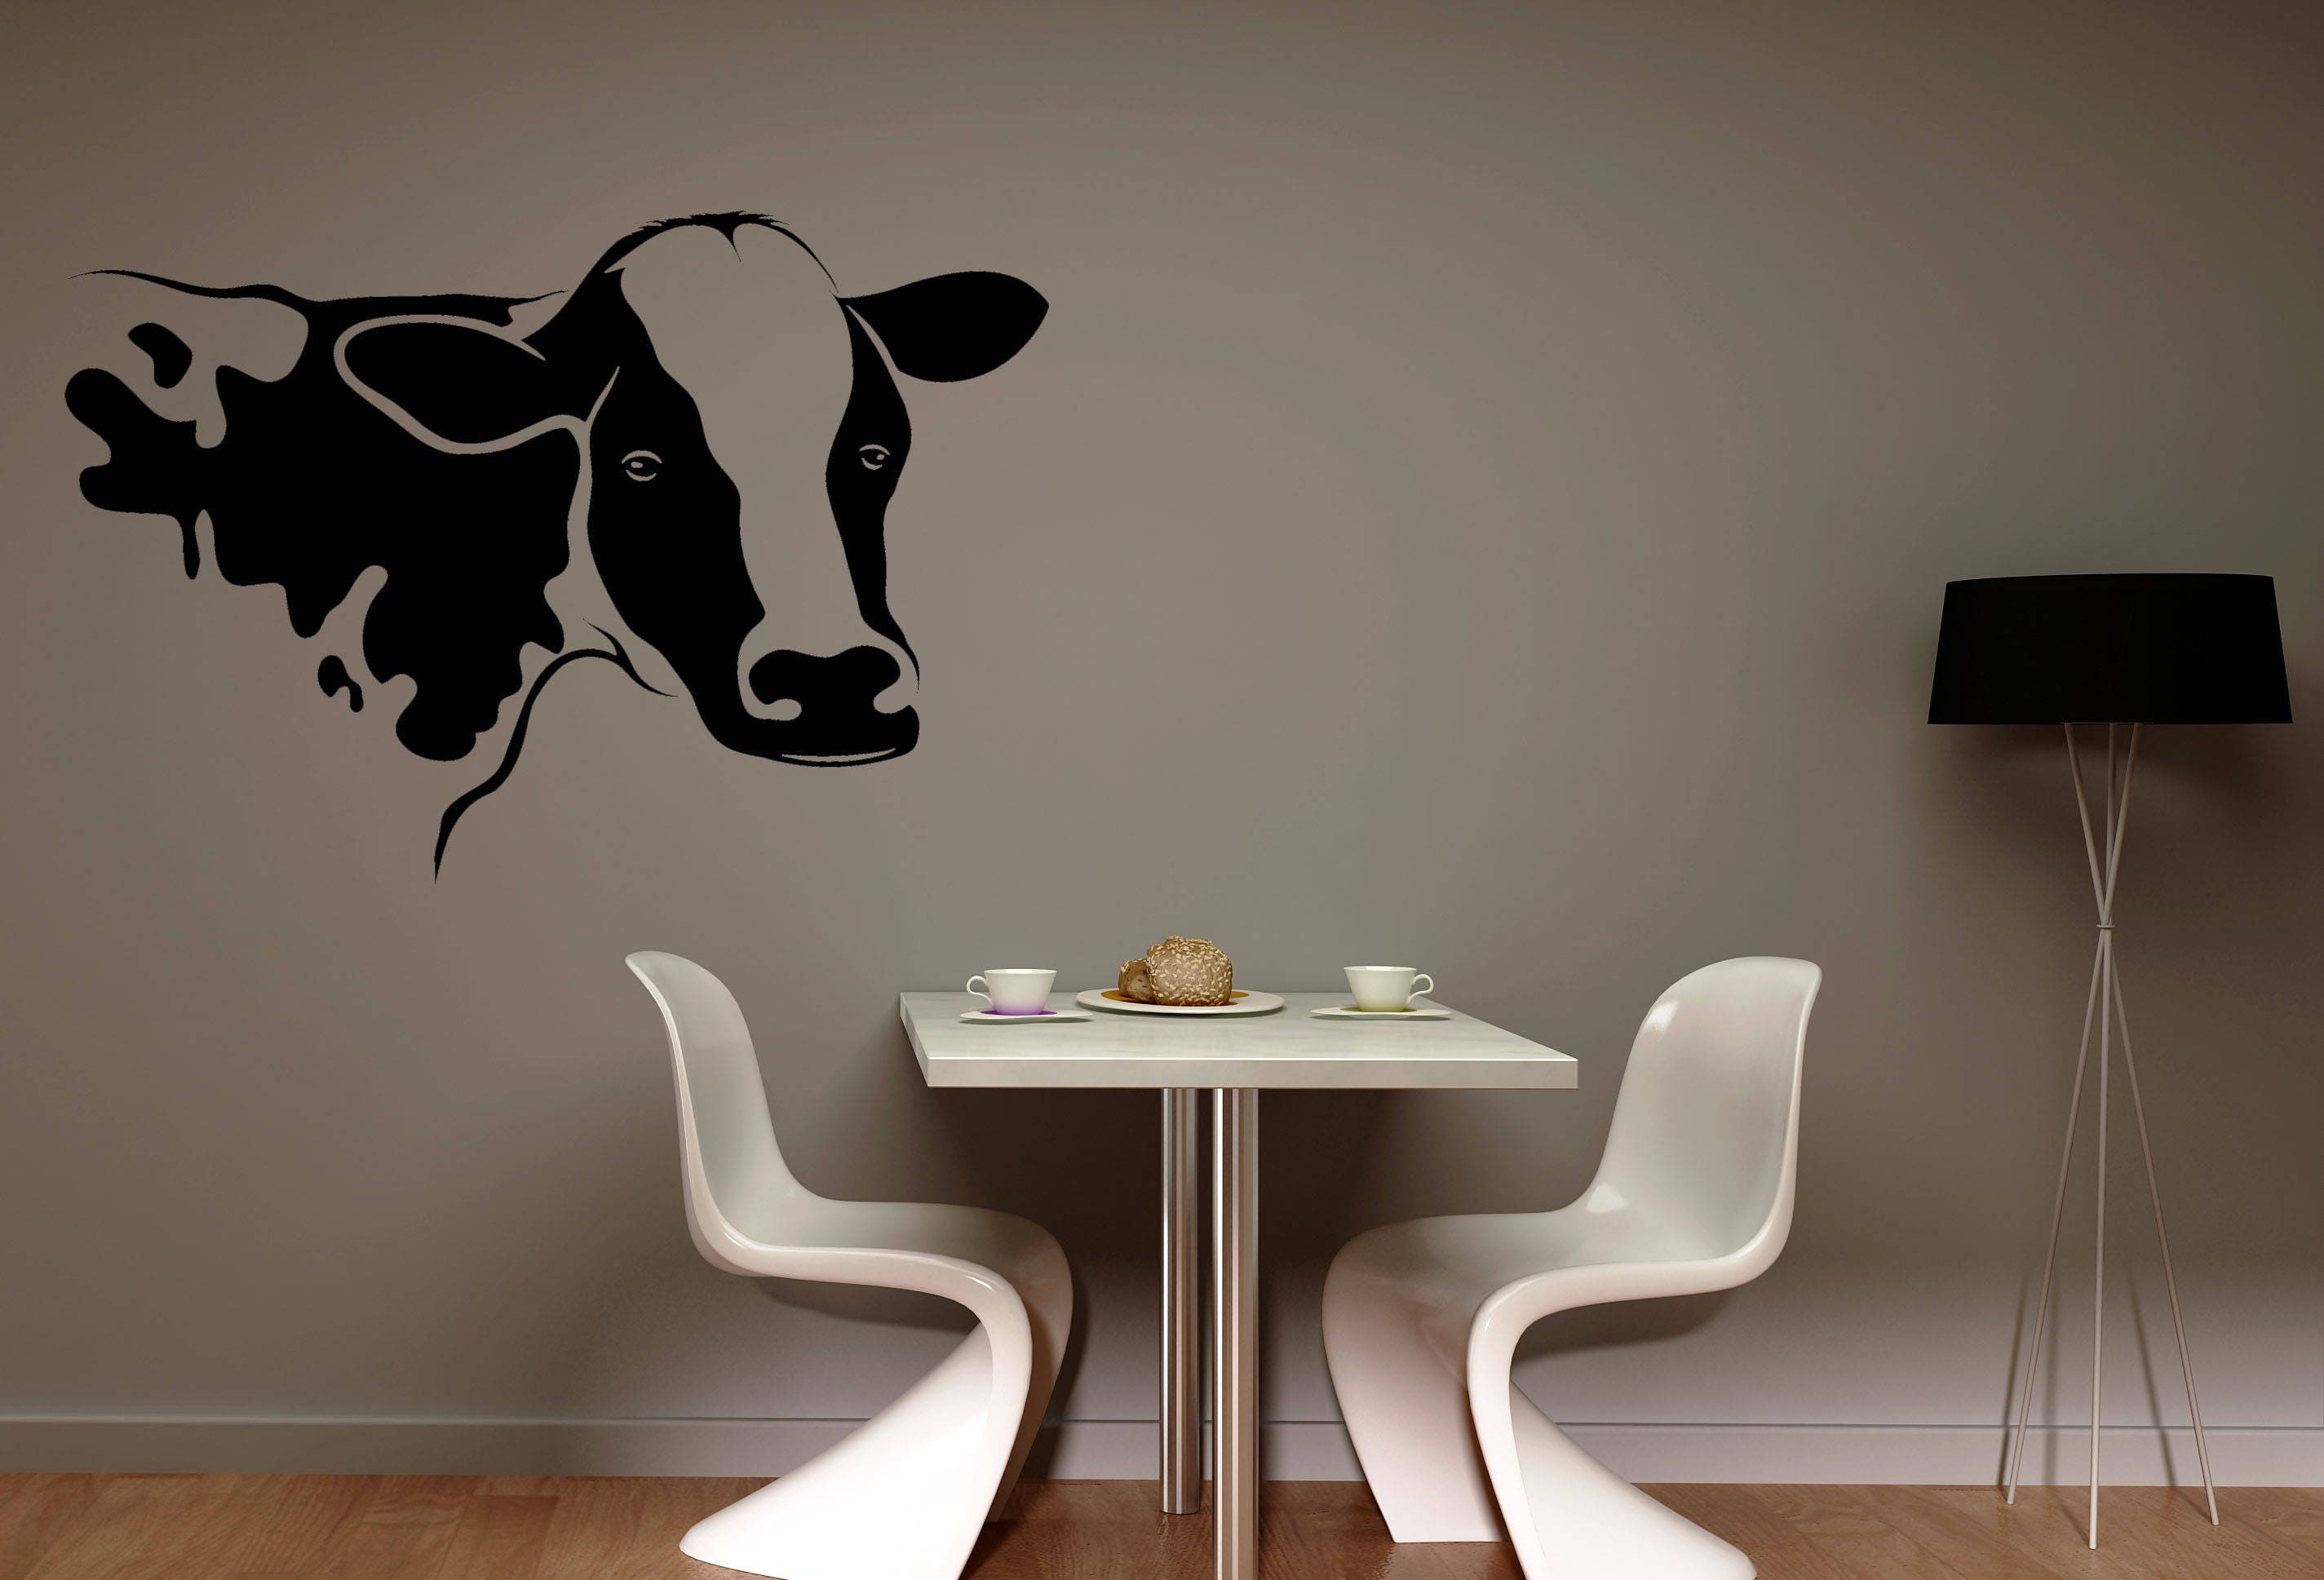  486 Pcs Funny Cow Wall Decor Room Decor Cute Cow Prints Decor  Cow Gifts Cow Stickers Cow Print Vinyl Wall Art Decals Animal Wall Decals  for Bedroom Living Room Window Showcase